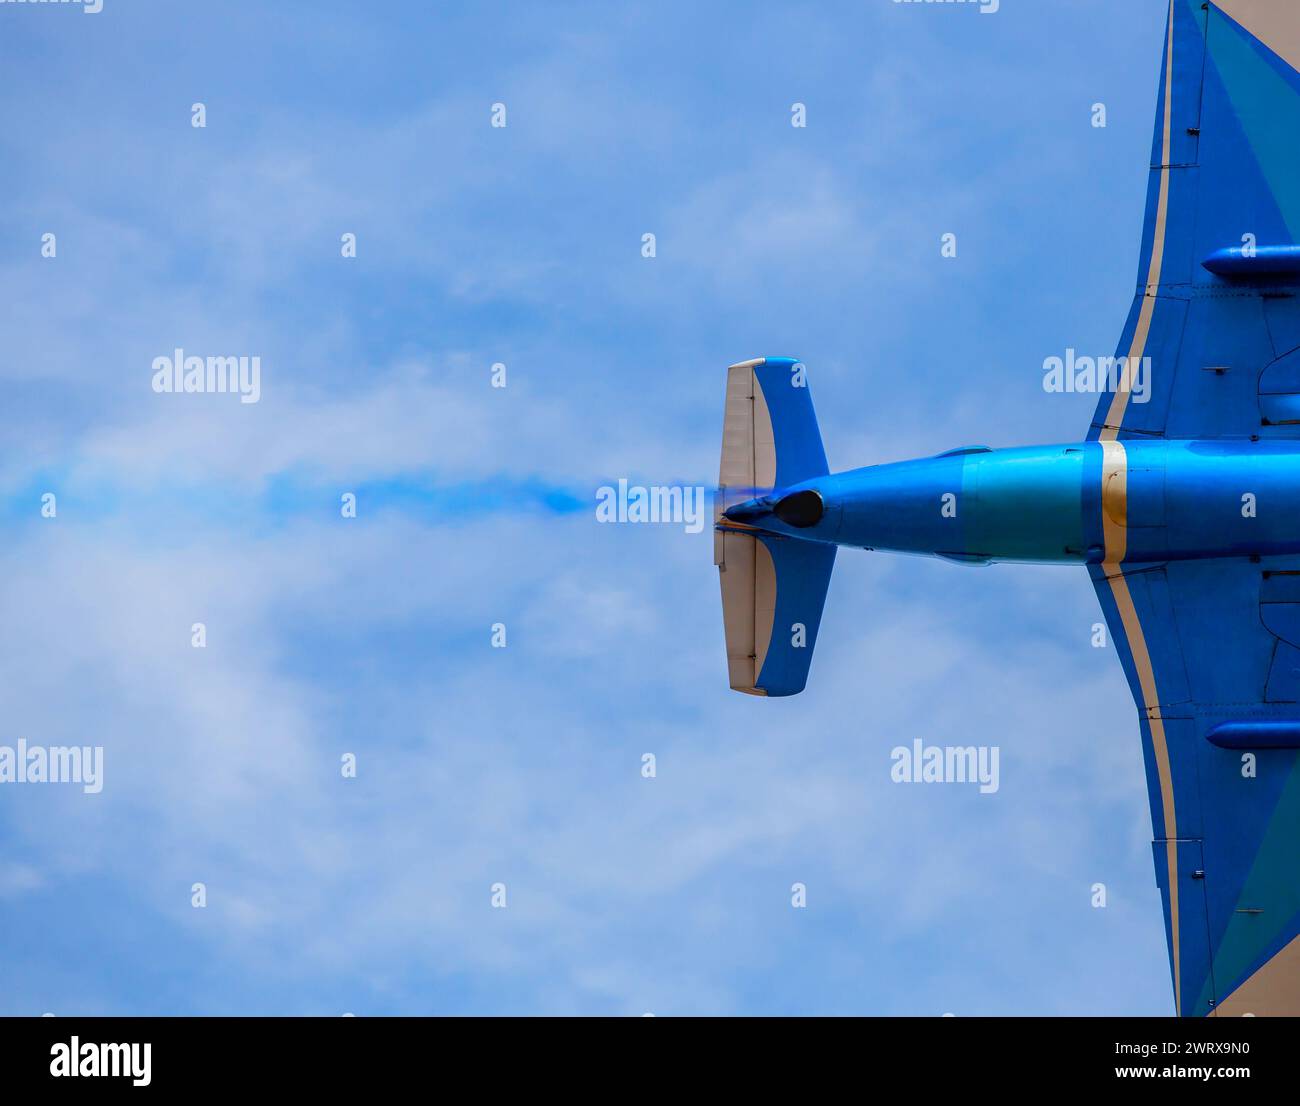 Flying in the sky on a background of clouds the plane Stock Photo